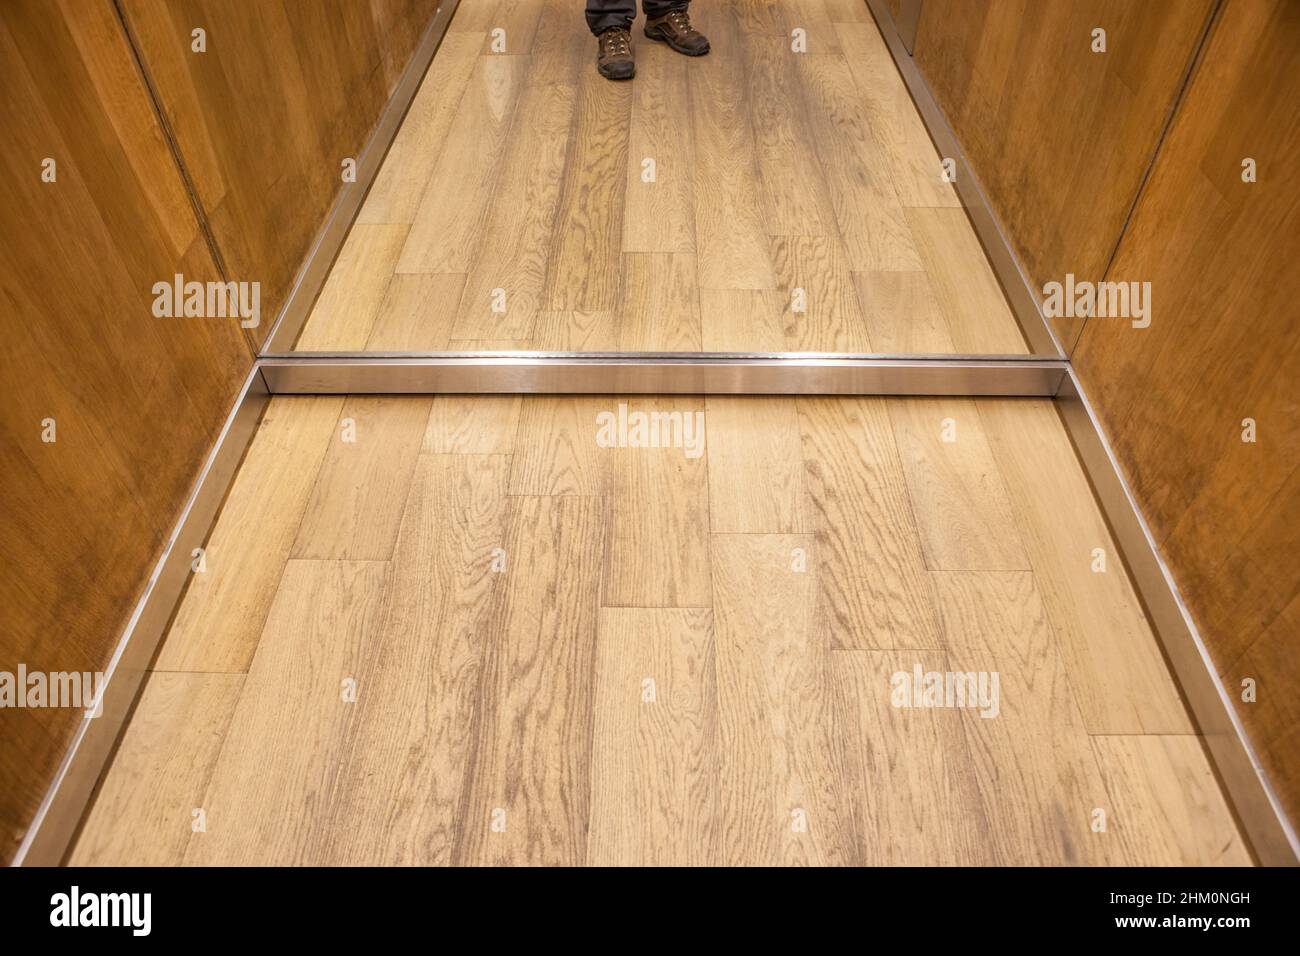 Madrid, Spain - February 24, 2017: Lift wooden interior of National Archaeological Museum. Interior space Stock Photo